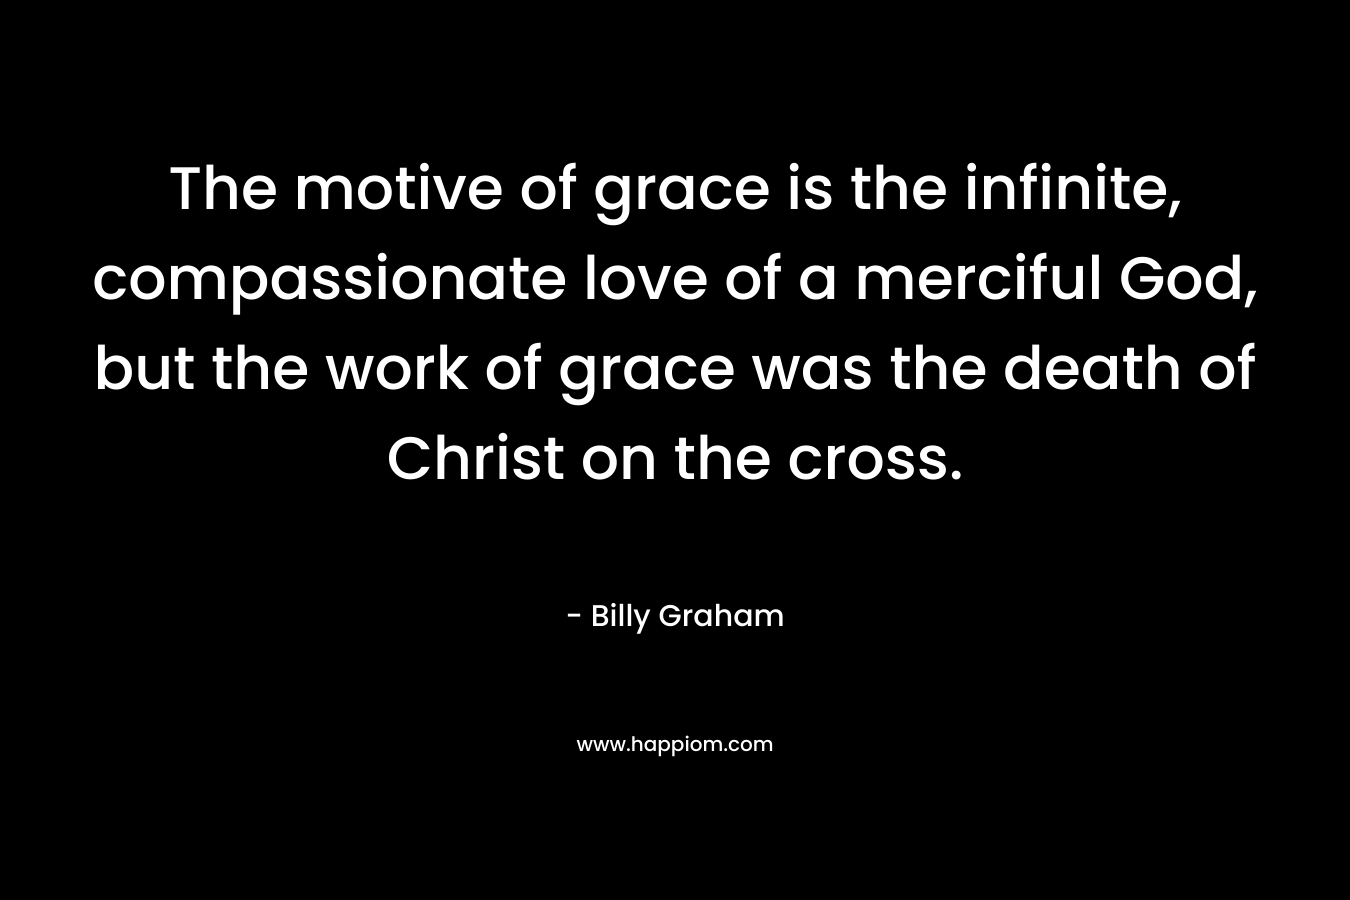 The motive of grace is the infinite, compassionate love of a merciful God, but the work of grace was the death of Christ on the cross. – Billy Graham